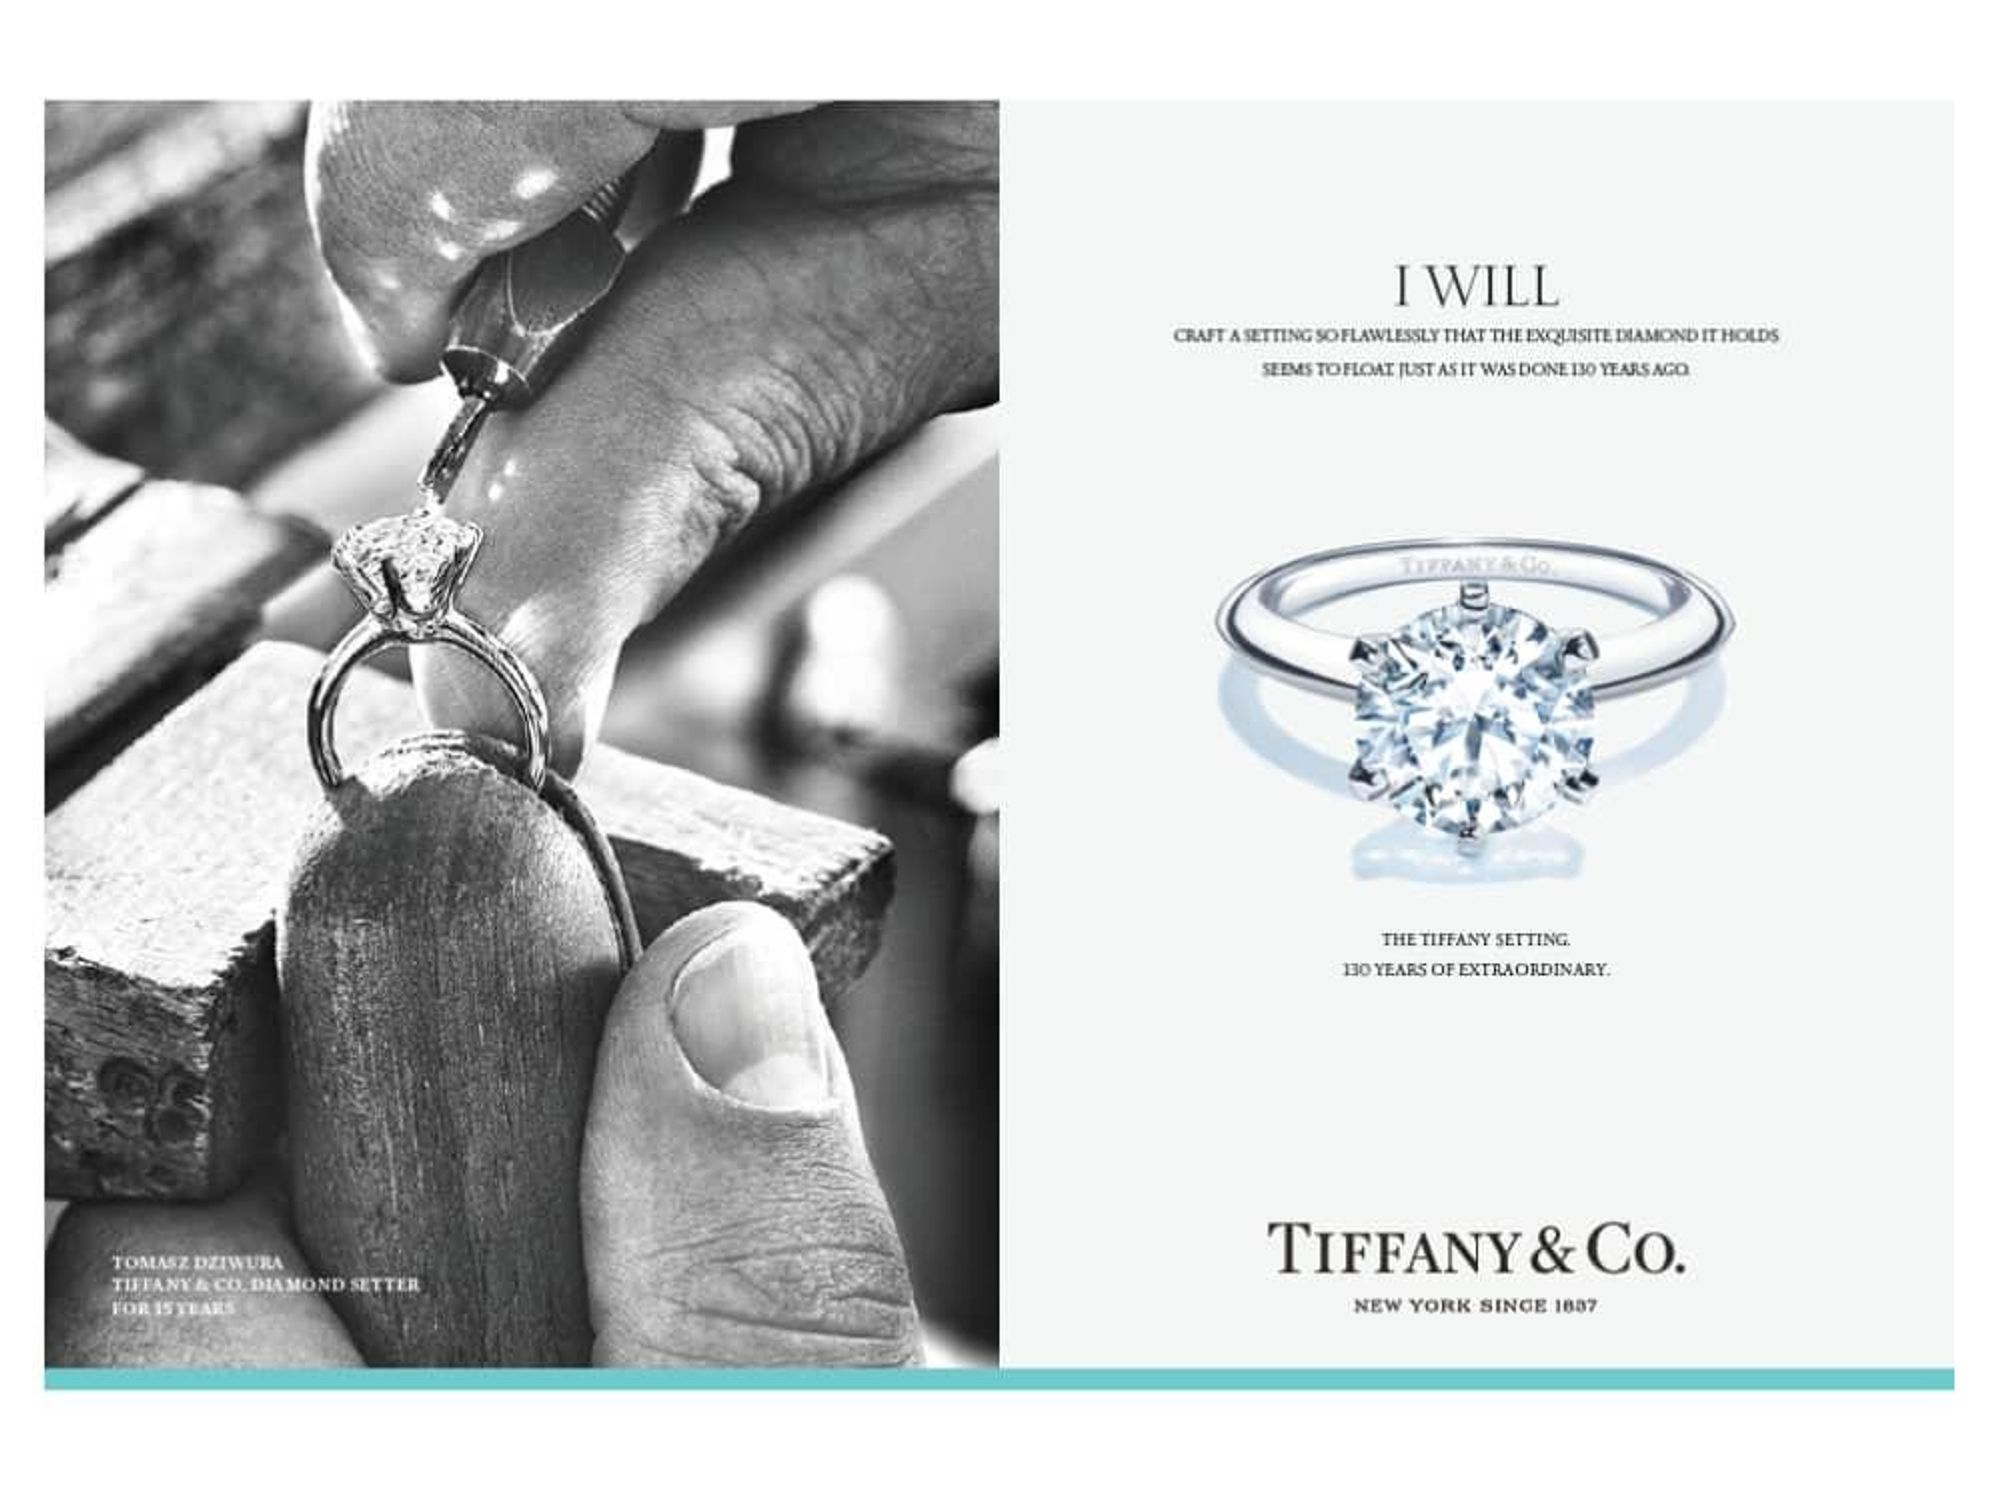 The Luxury Battle Brewing Over Tiffany - The New York Times